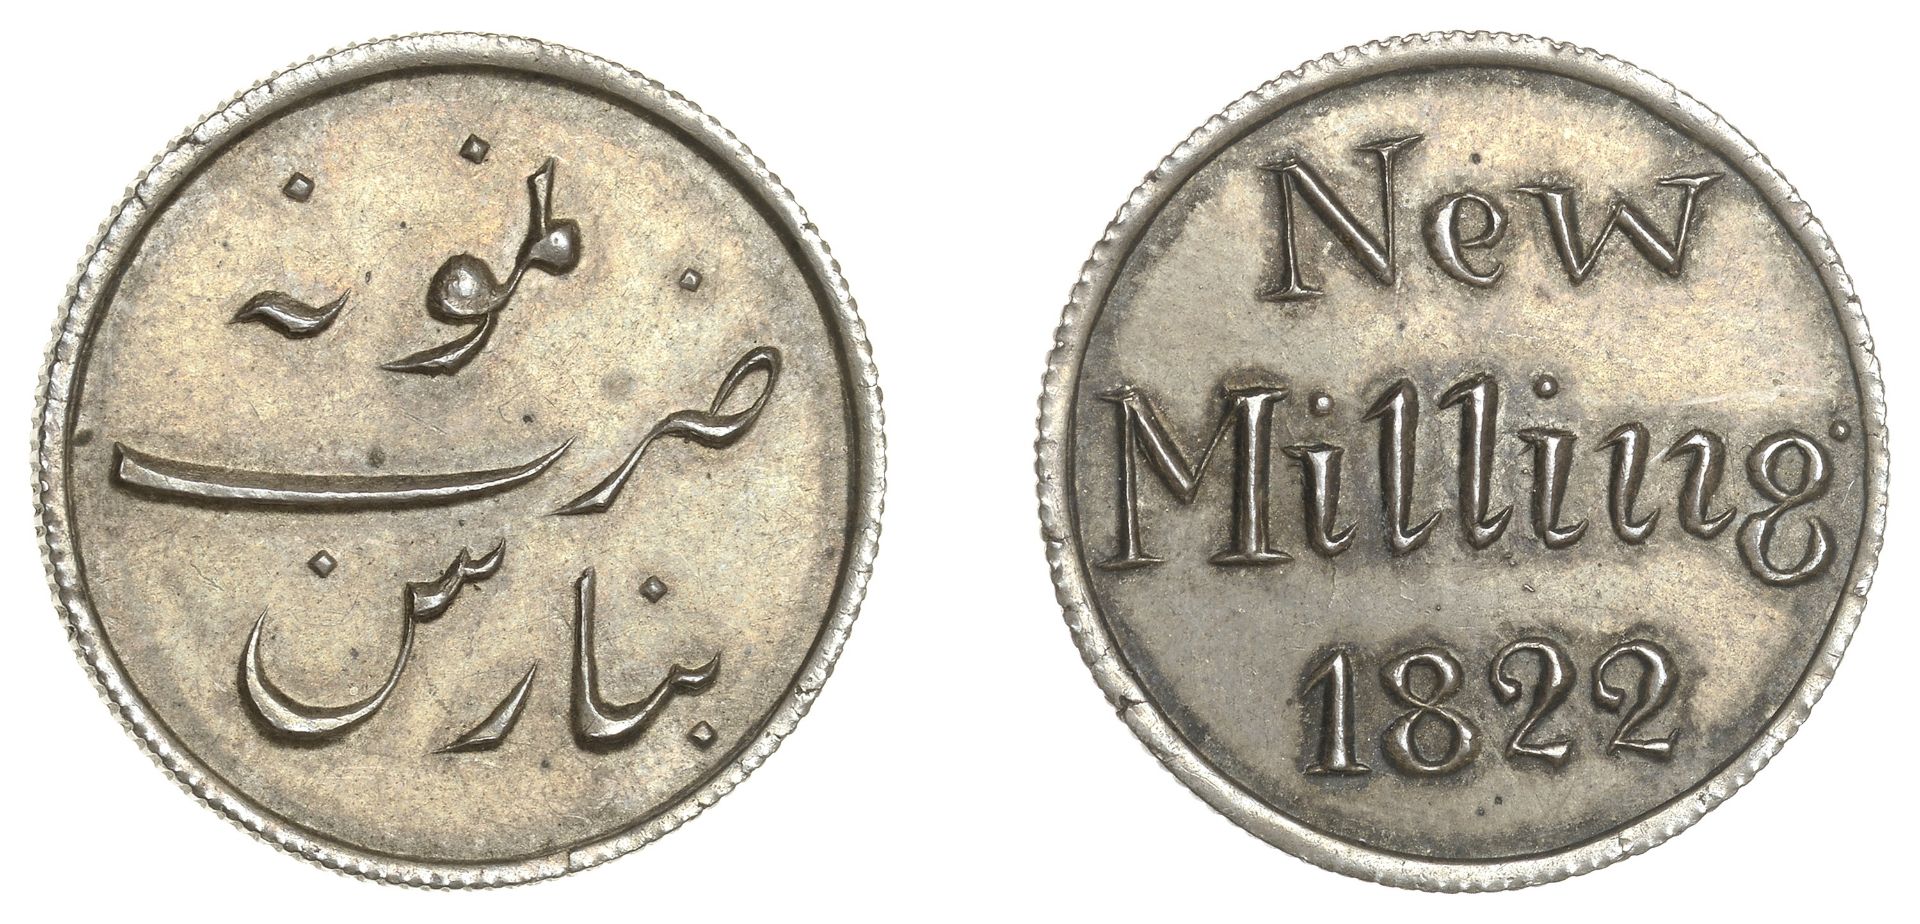 East India Company, Bengal Presidency, Benares Mint: Third phase, silver Pattern Rupee, 1822...